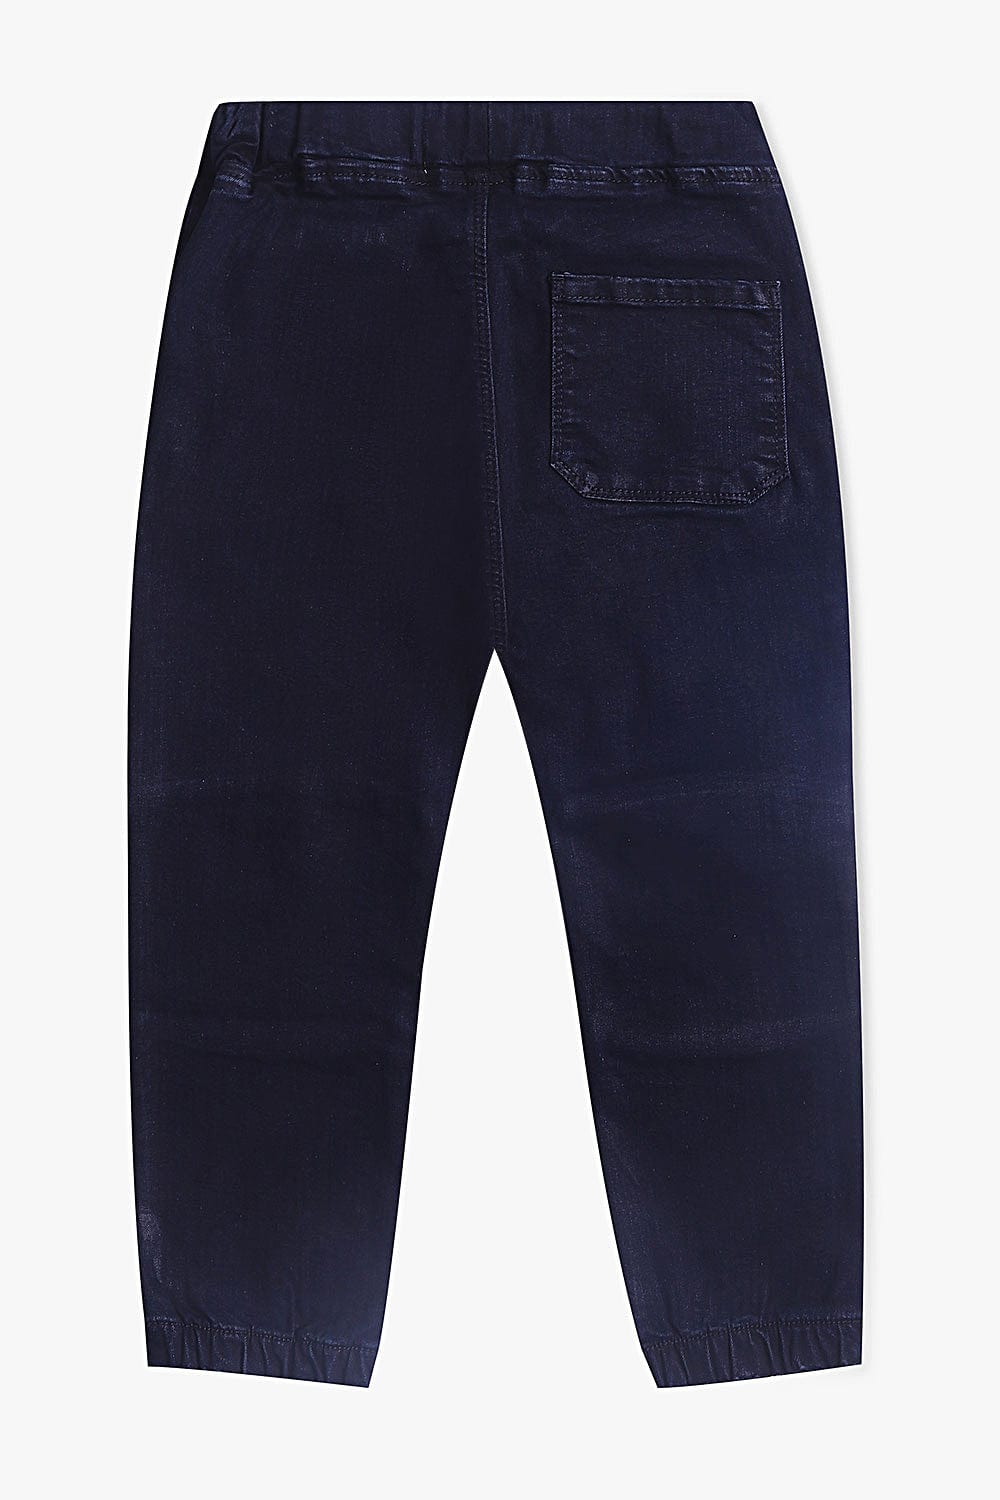 Hope Not Out by Shahid Afridi Boys Denim Pants Jogger Pants